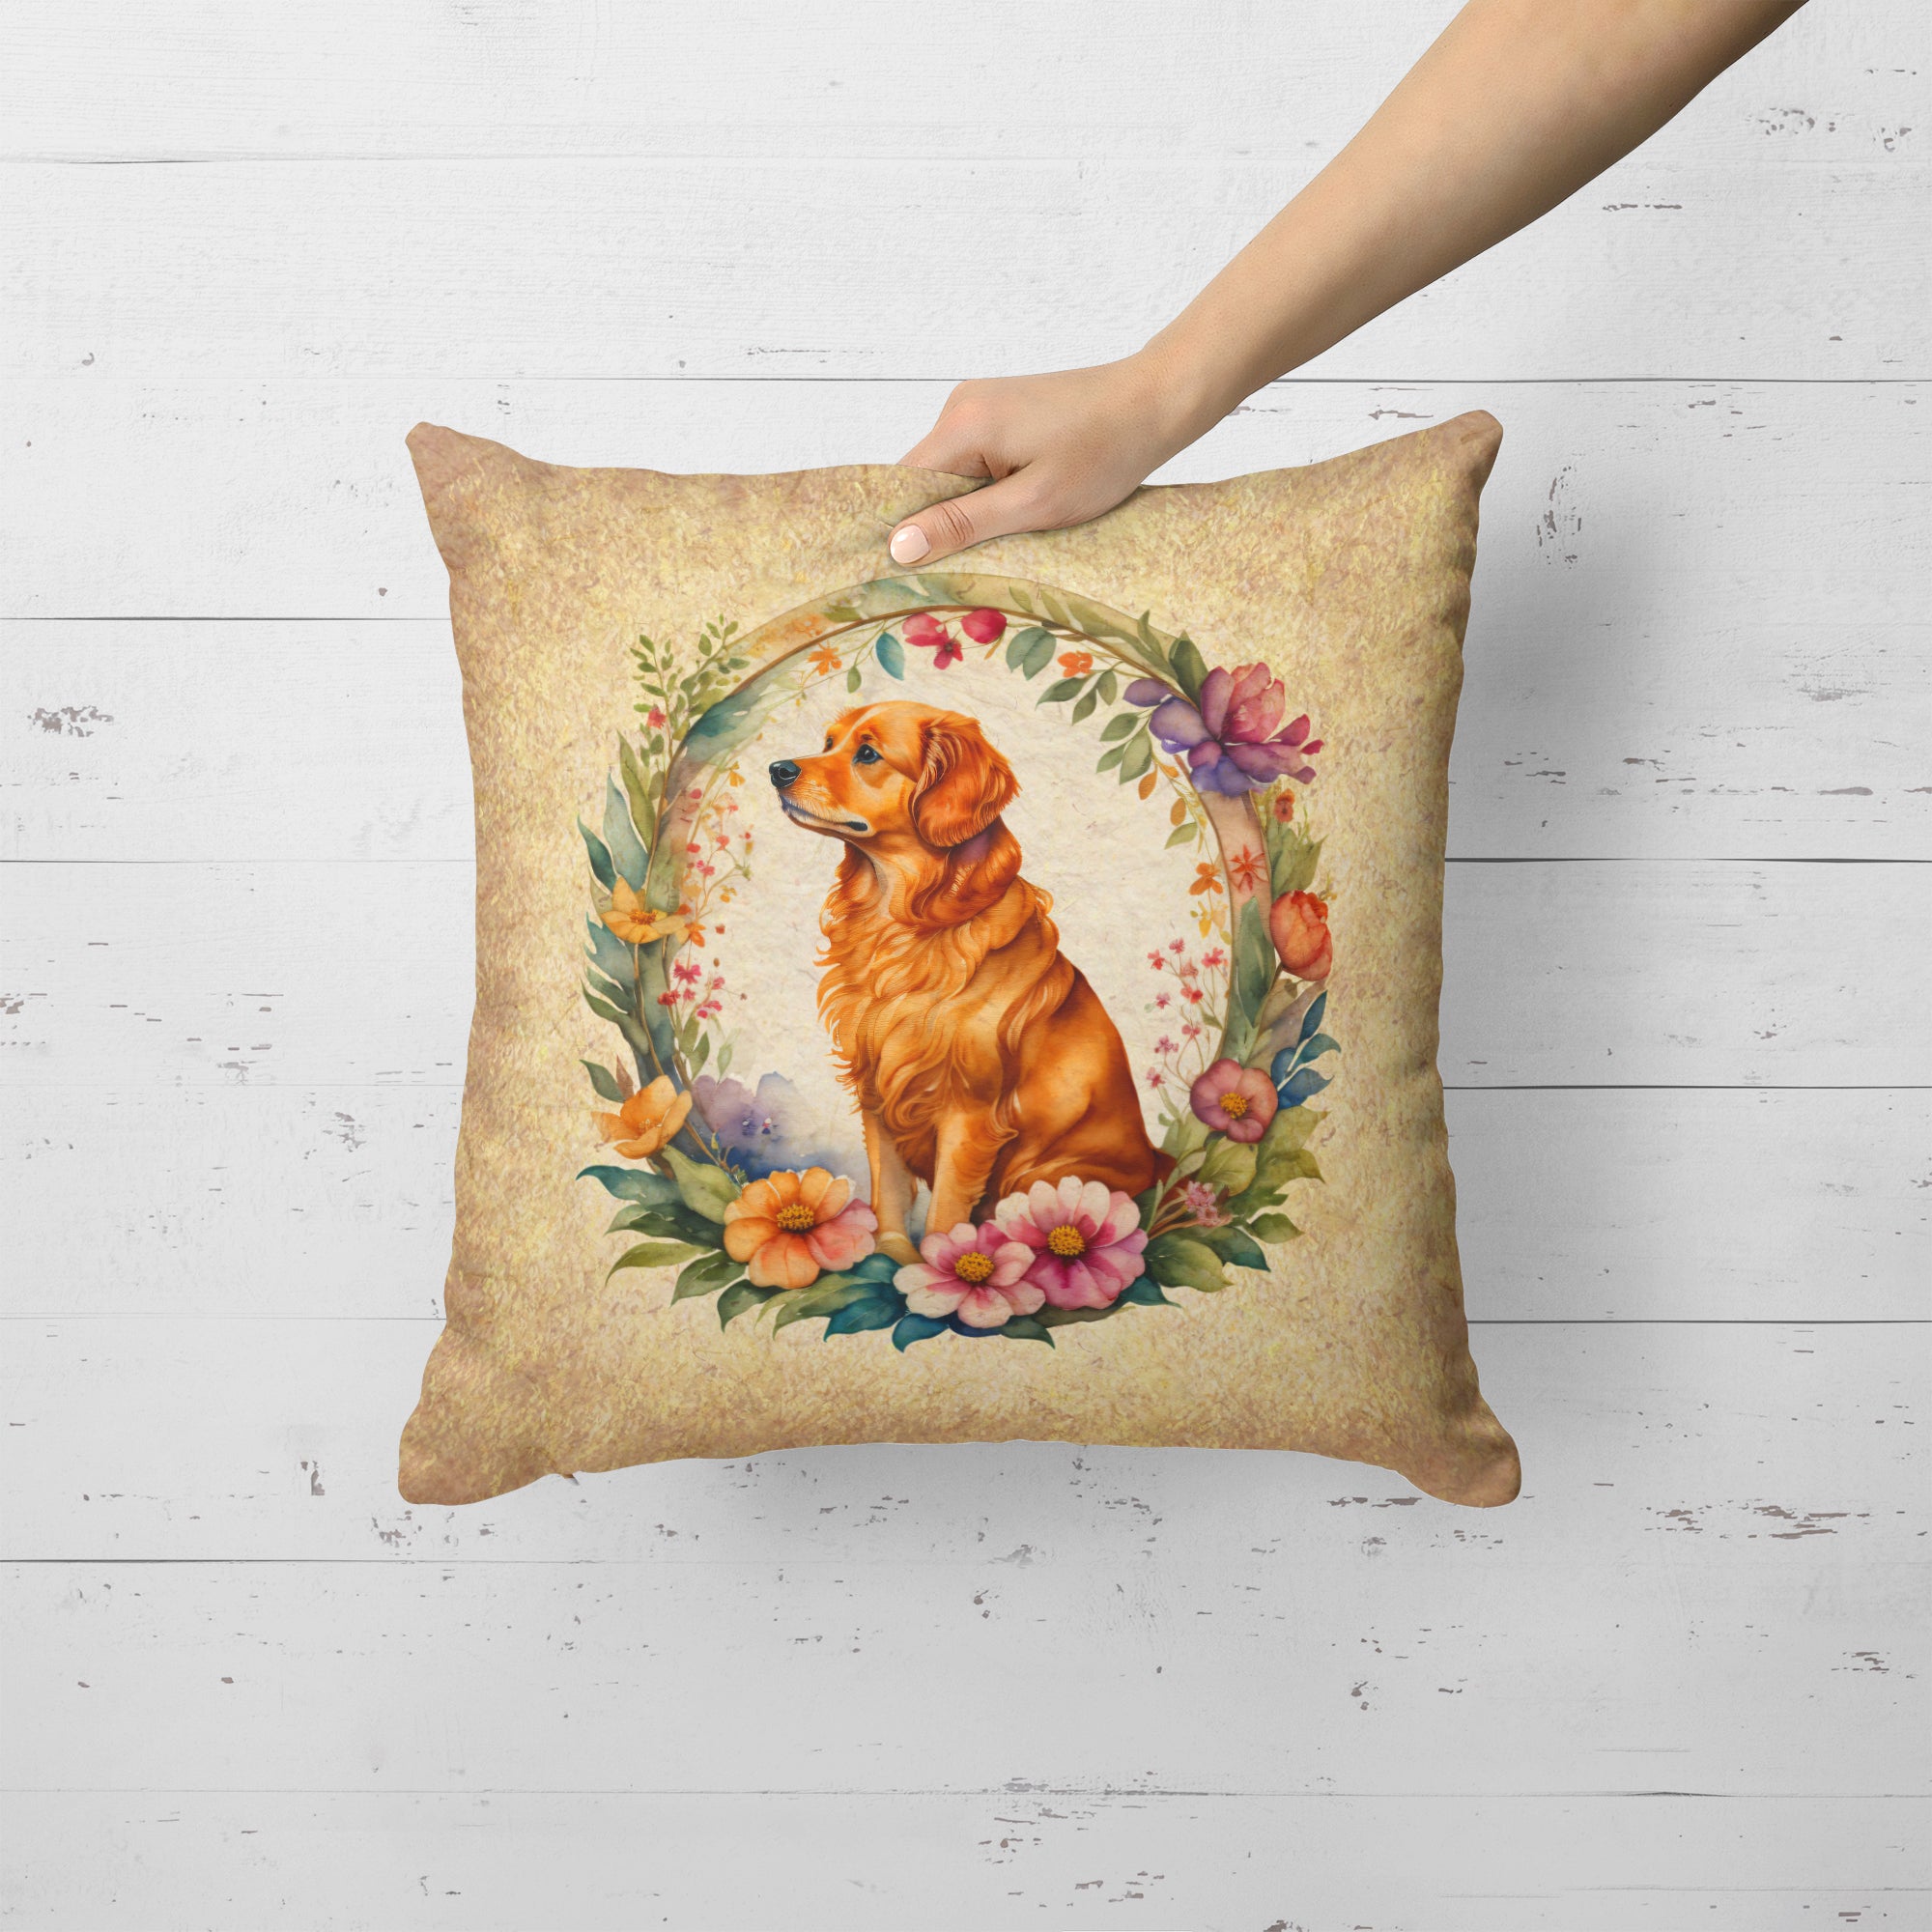 Buy this Nova Scotia Duck Tolling Retriever and Flowers Fabric Decorative Pillow